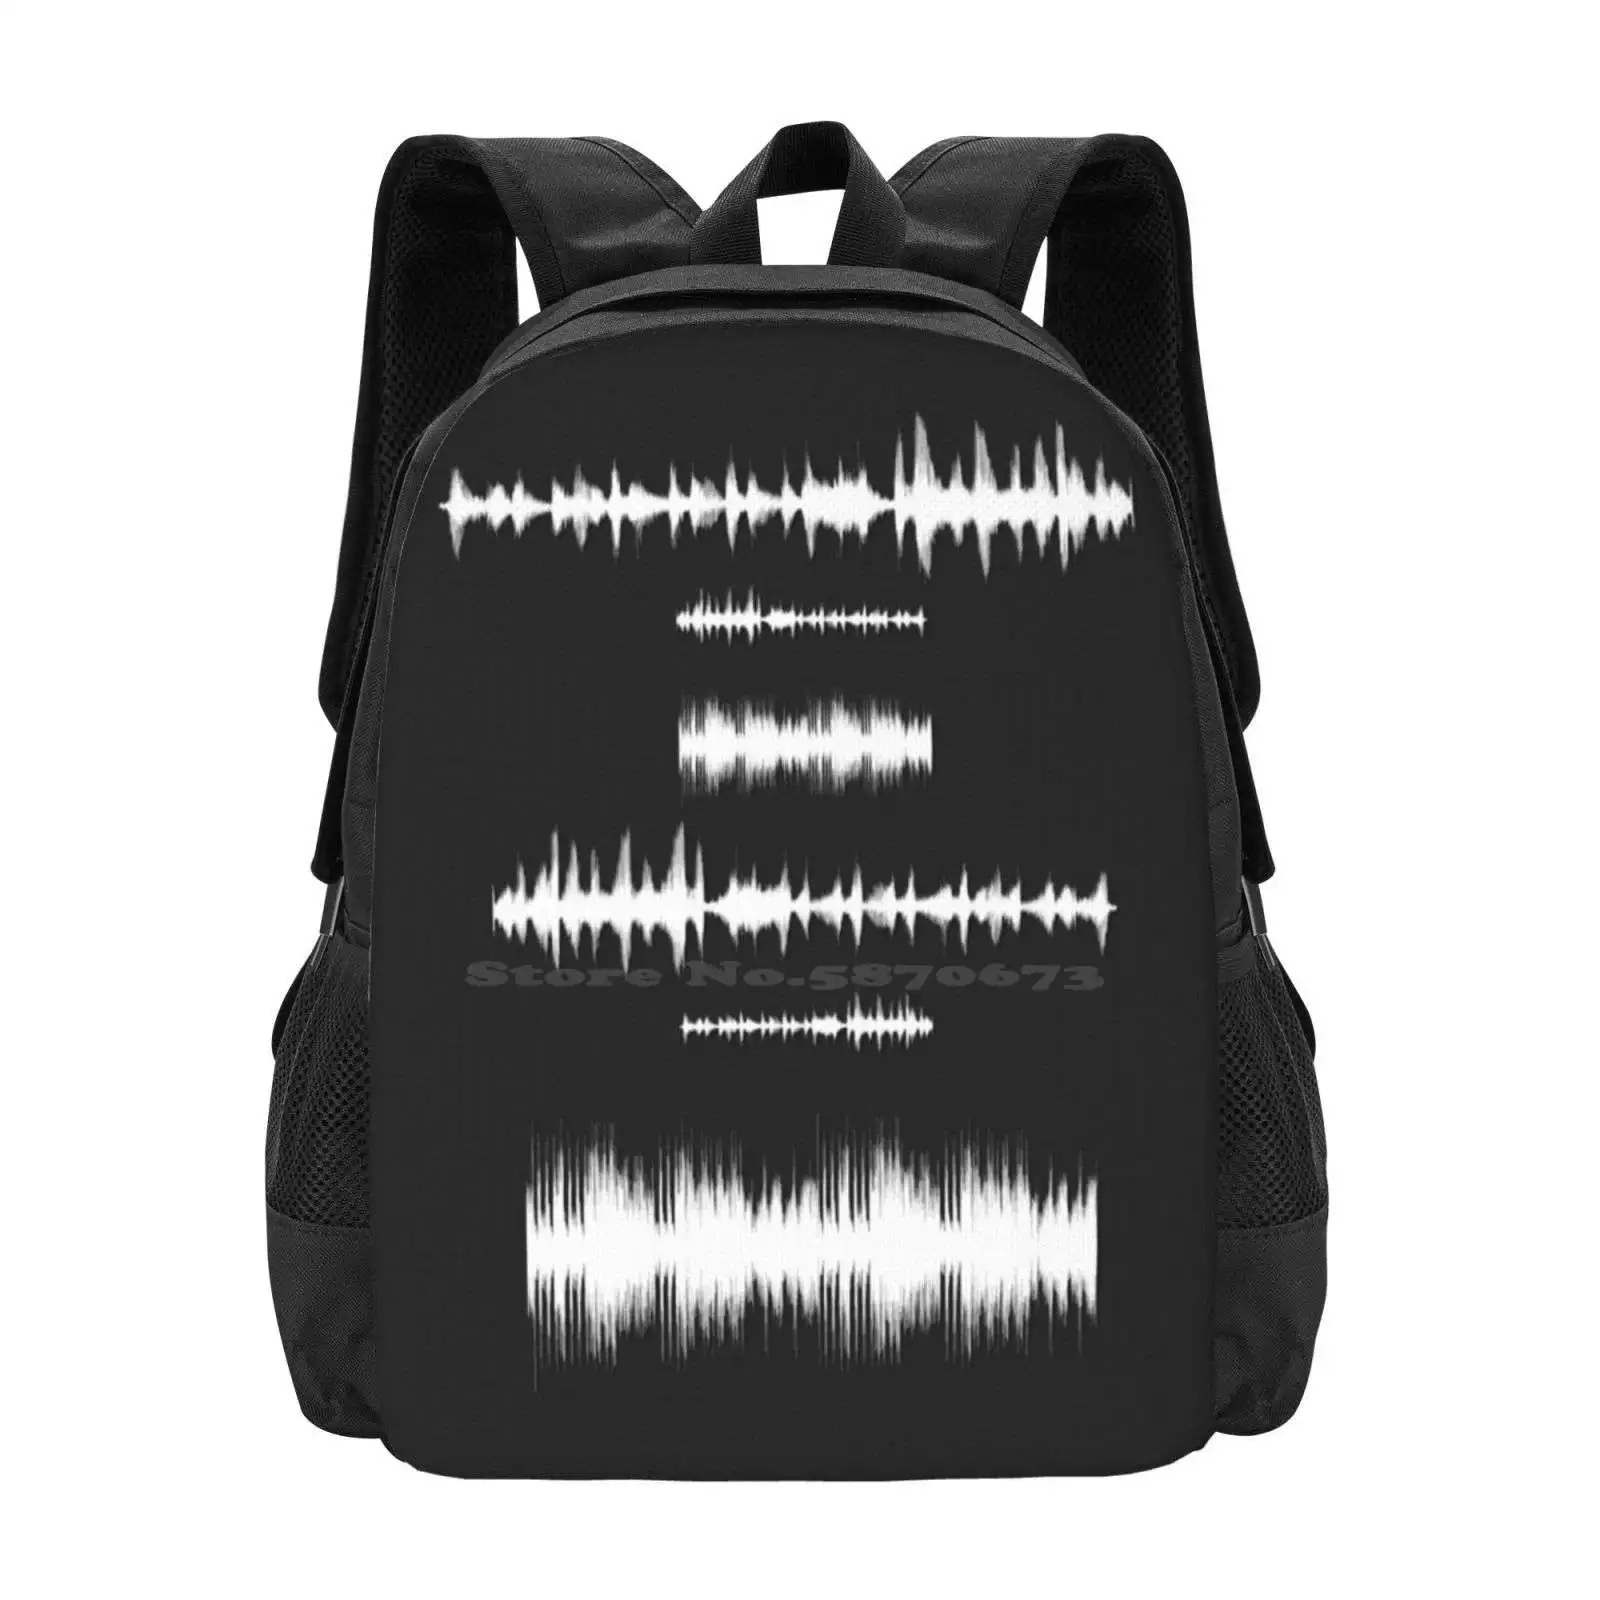 

Soundwave White Backpacks For School Teenagers Girls Travel Bags Producer Business Musician Instrument Sounds Listen Tune Dj